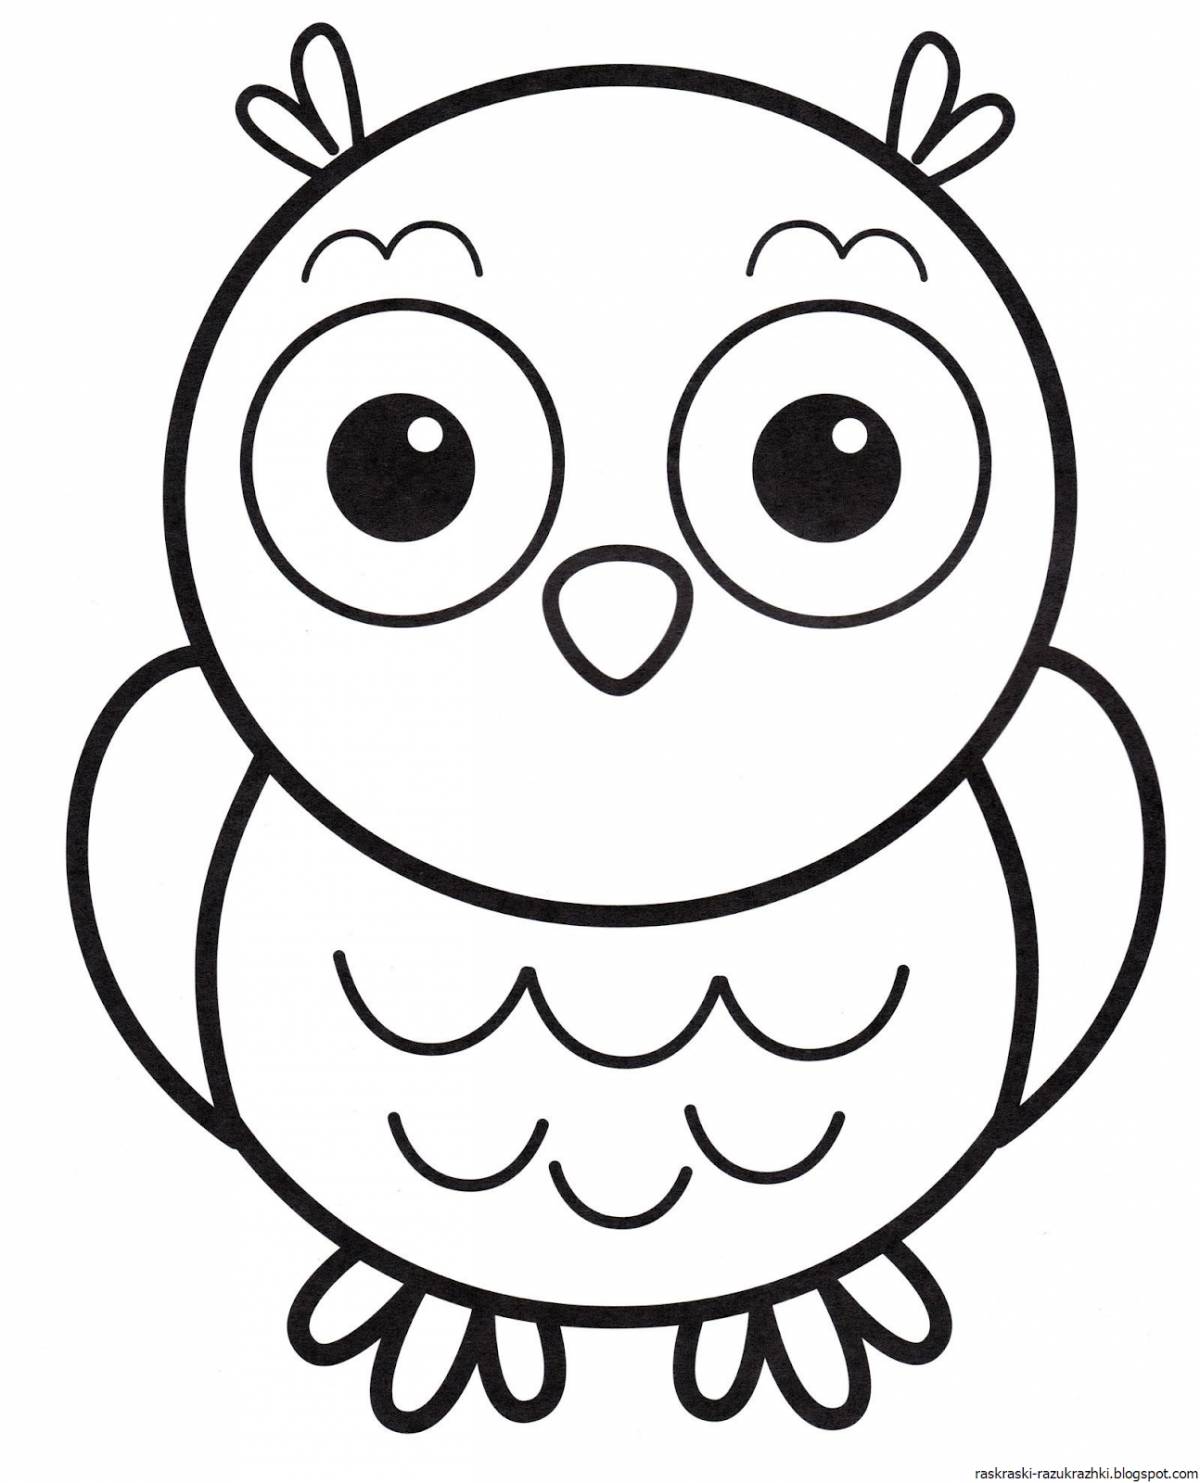 Exciting baby coloring for kids